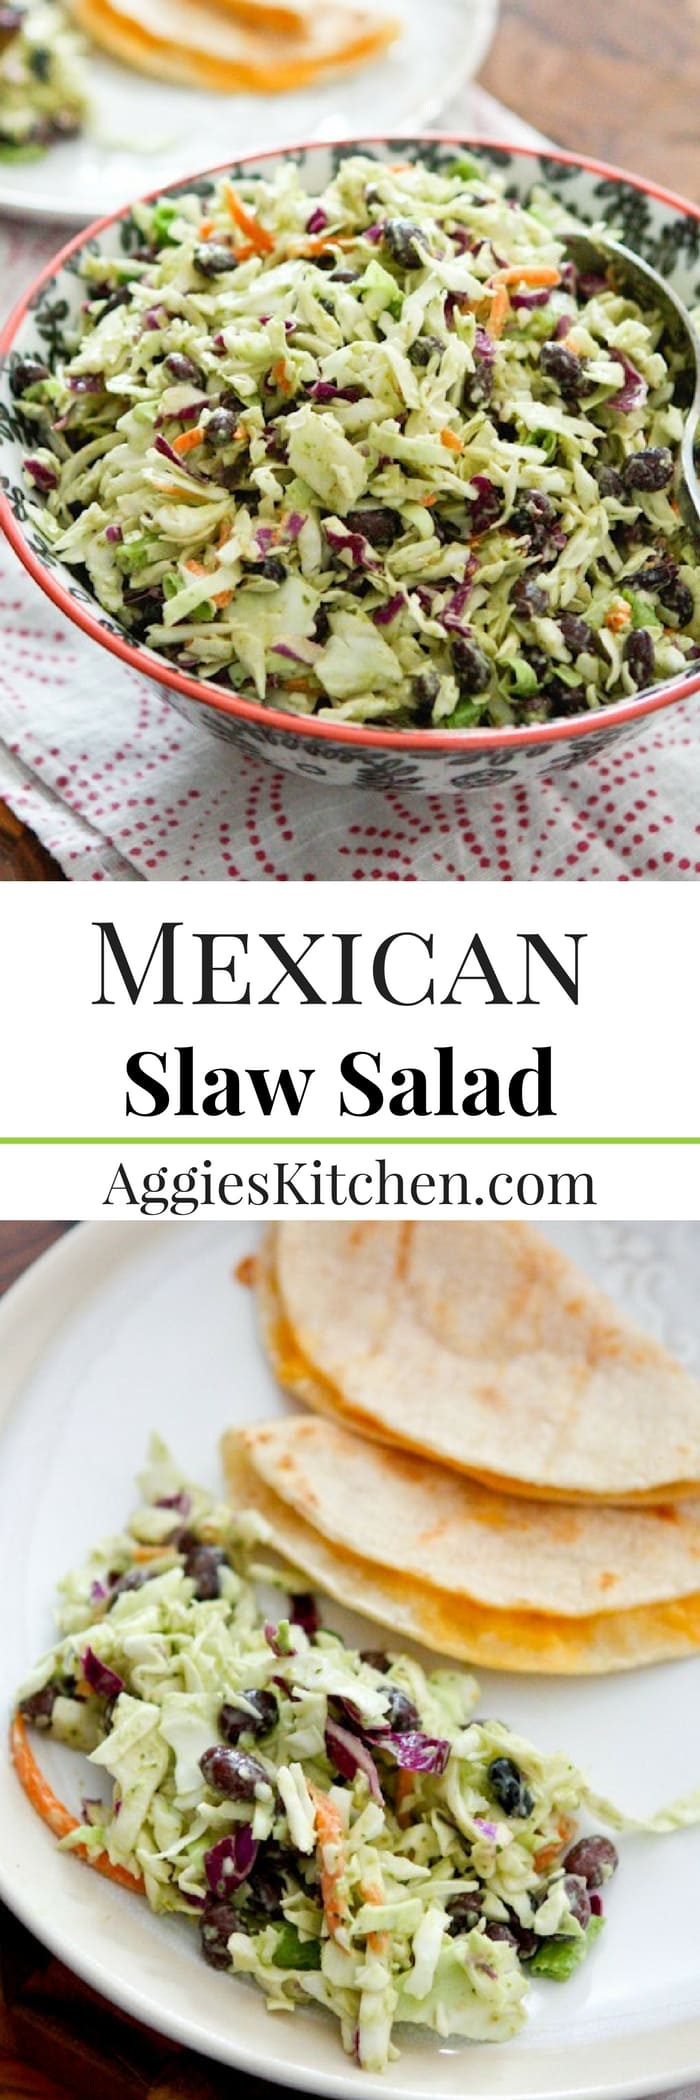 Mexican Slaw Salad with Black Beans